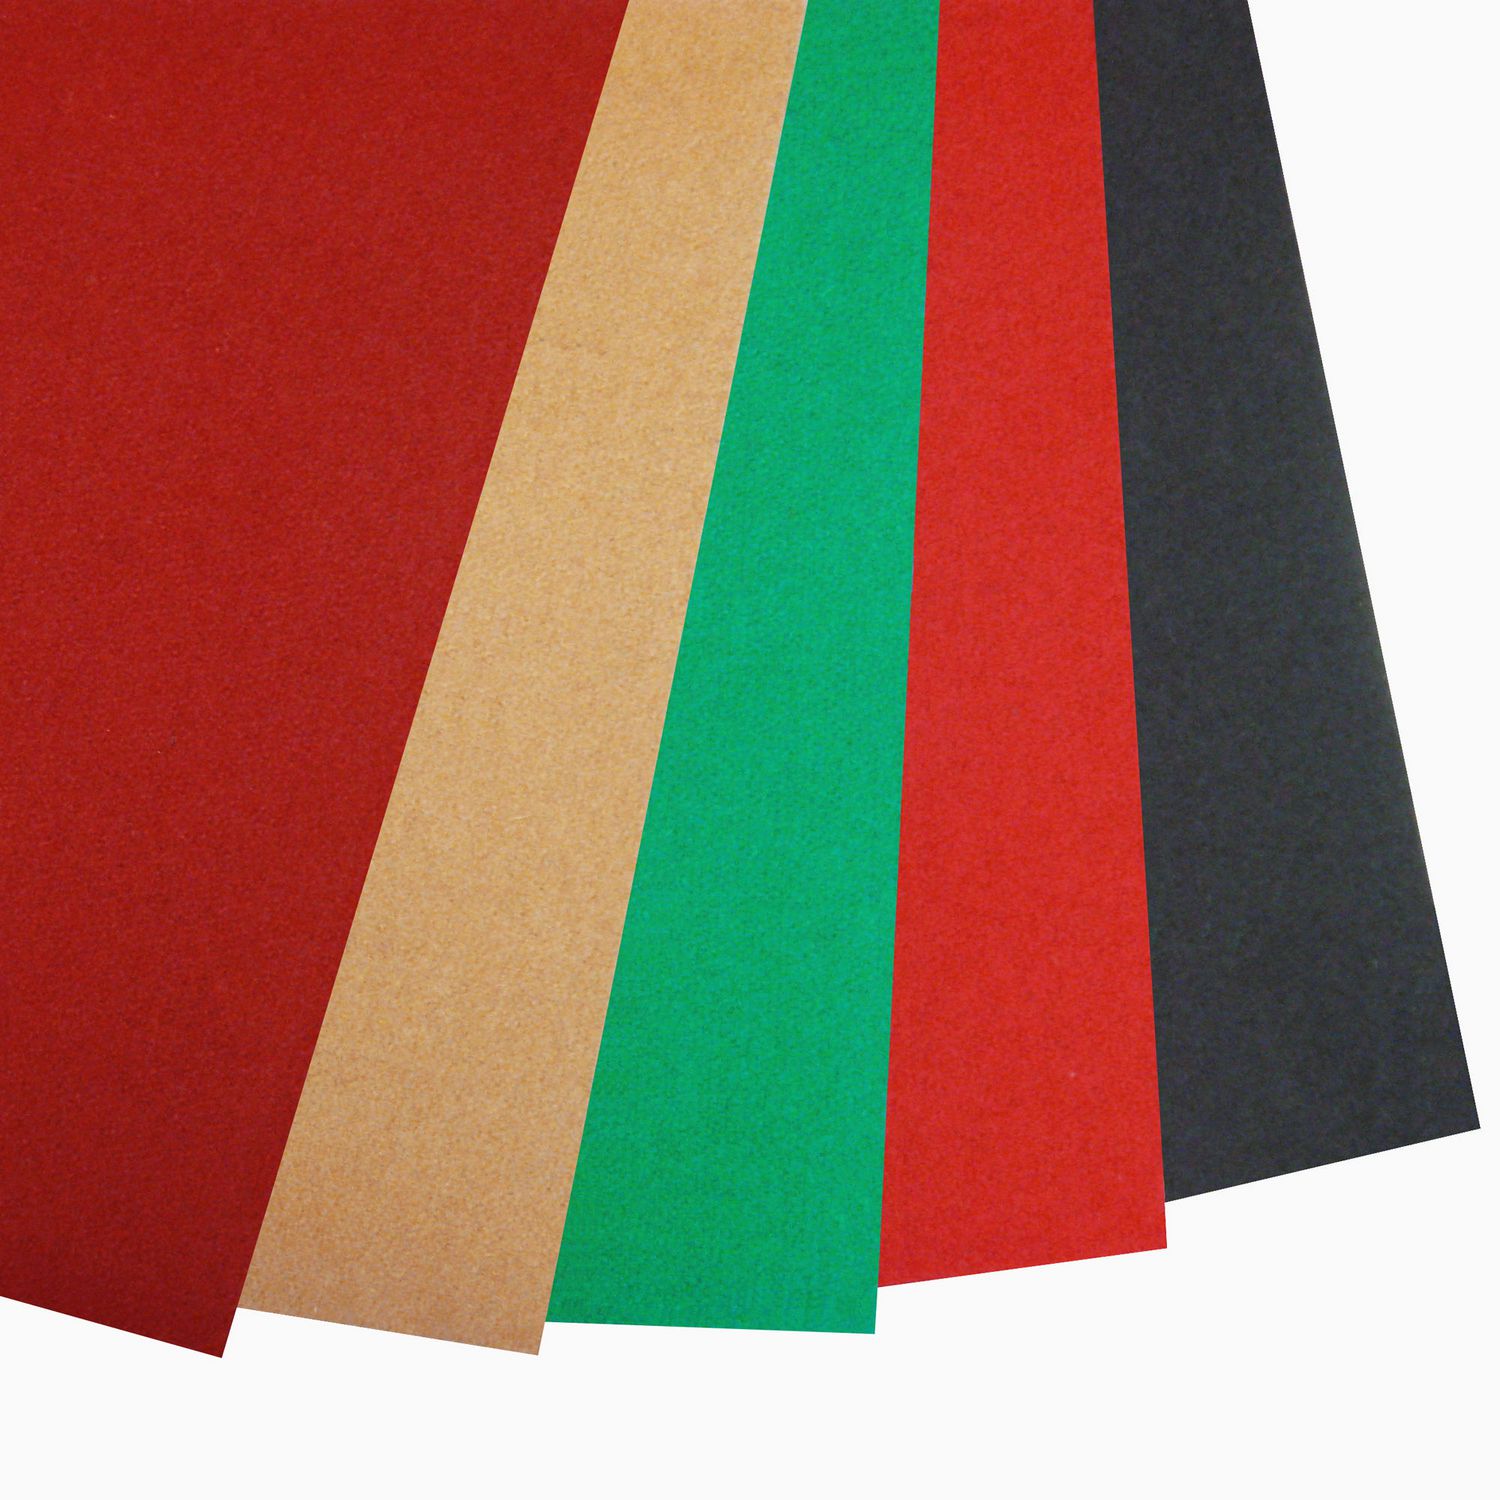 Deluxe Worsted Pool Table Cloth For 9ft Table High Speed Billiard Cloth Felt